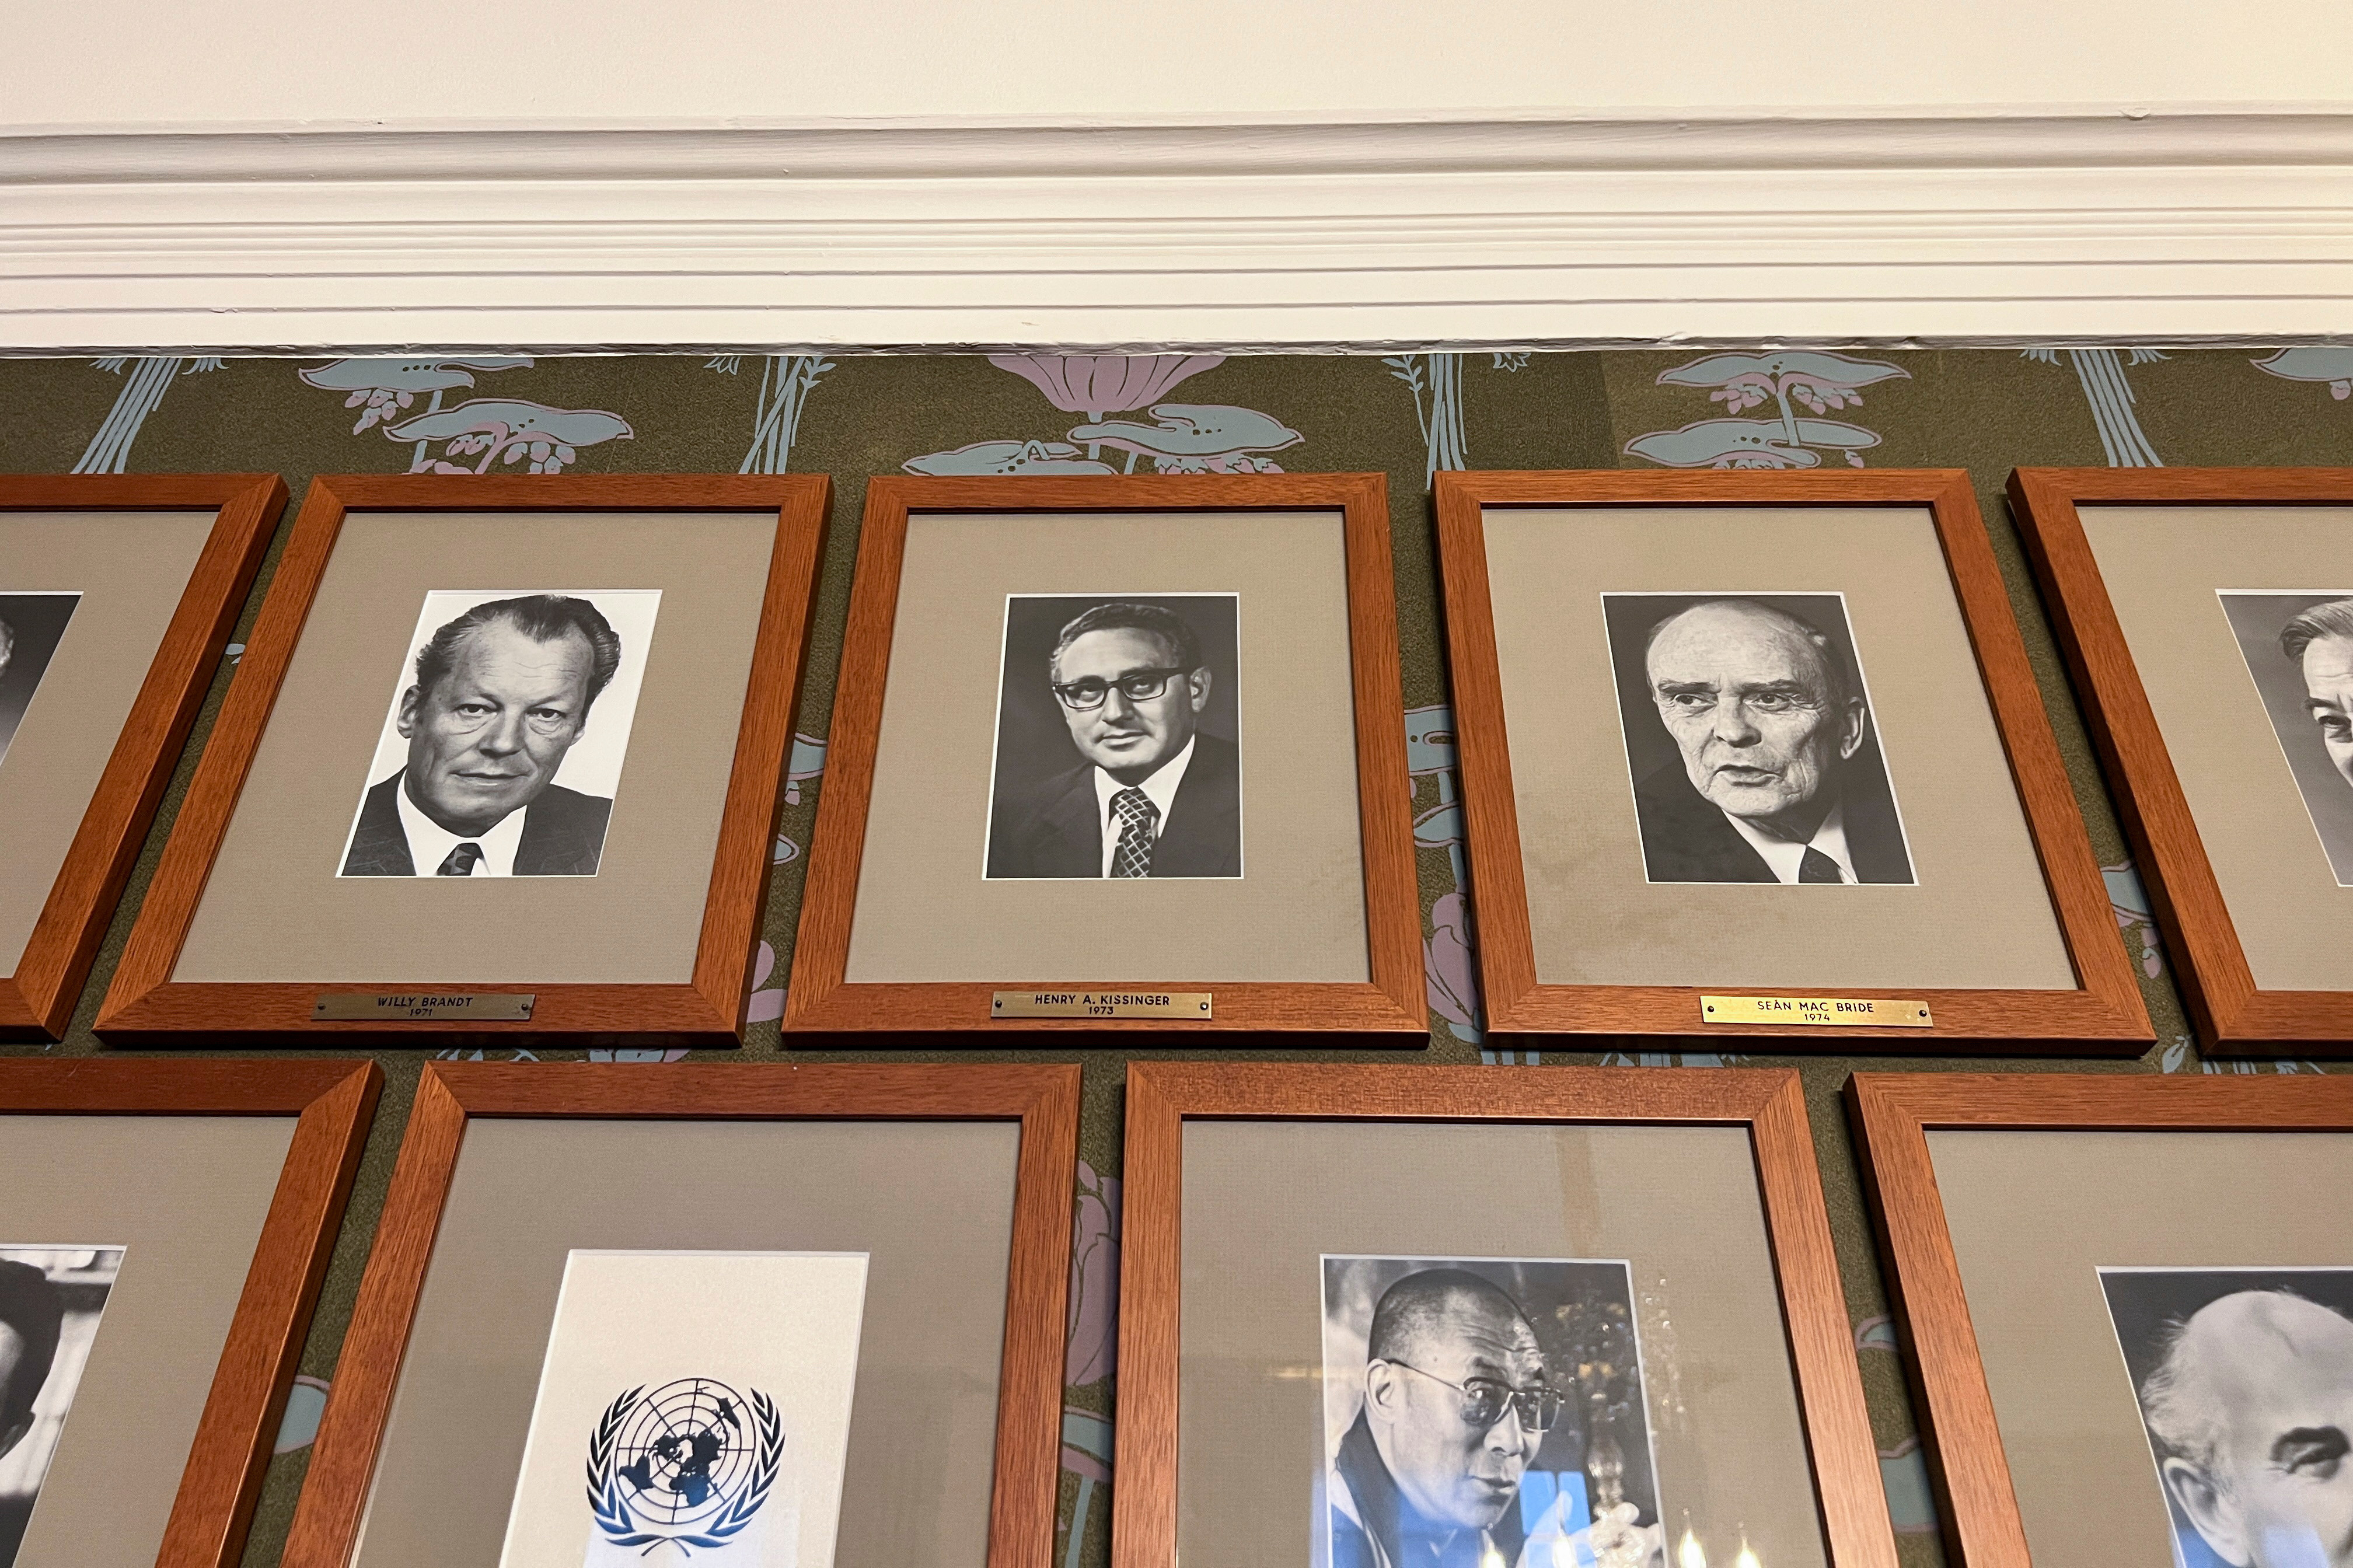 Portraits of Nobel Peace Prize laureates, including of Henry Kissinger, are seen in the meeting room where the Norwegian Nobel Committee holds its meetings at the Norwegian Nobel Institute in Oslo